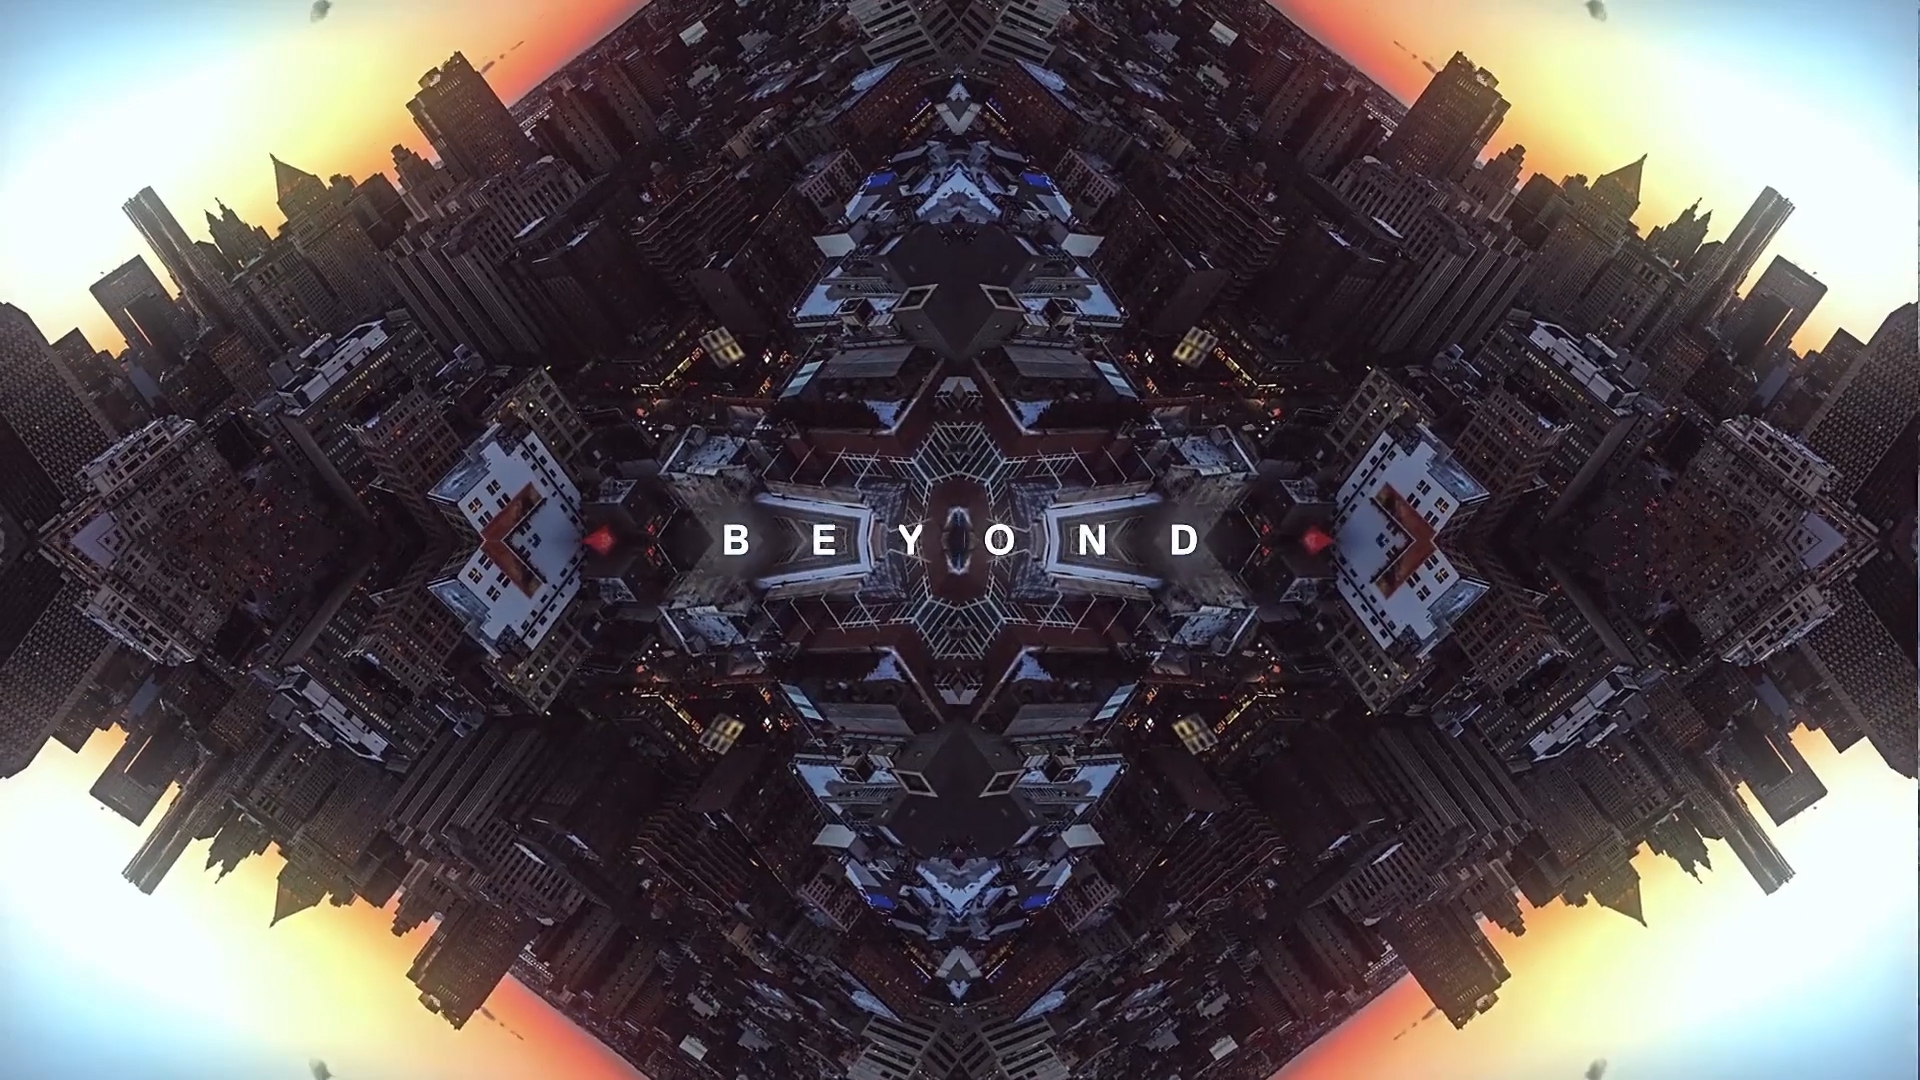 An image from an opening event video for EMC. There is a city as scene through a kaleidoscope with the word 'beyond' over it.